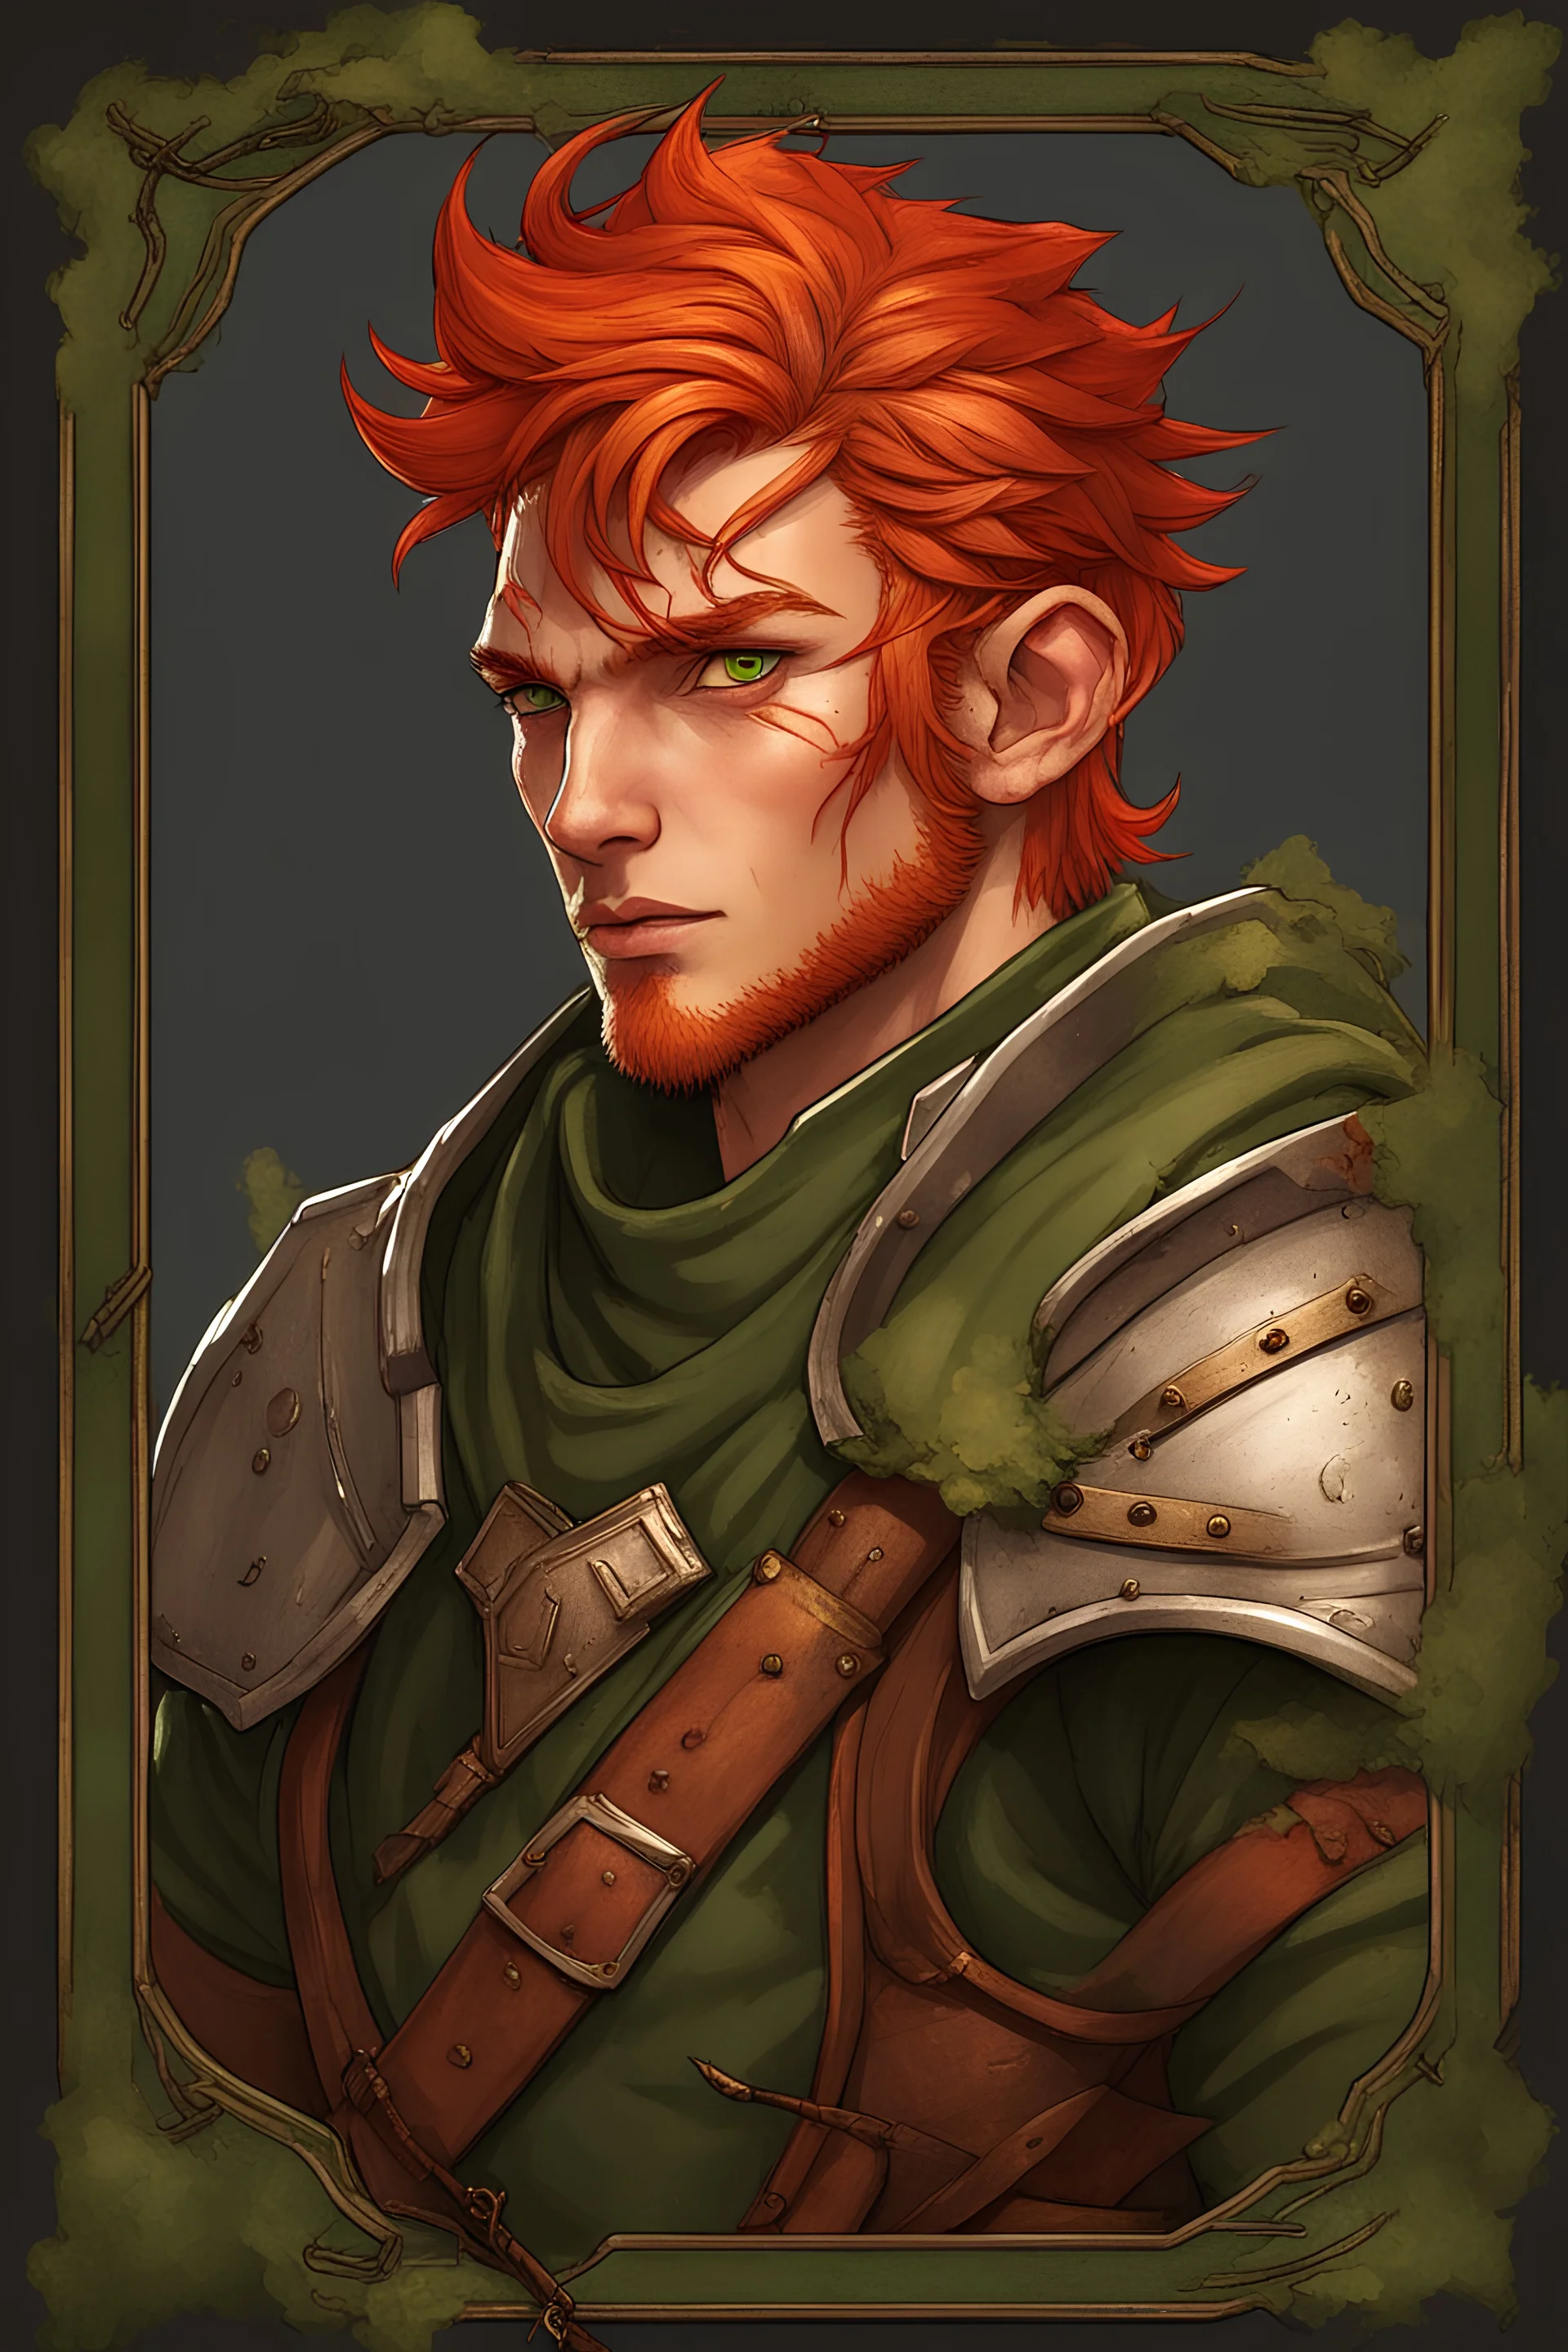 Male wood elf medieval fantasy combat medic. With fiery red hair cascading like autumn leaves and piercing green eyes that hold ancient wisdom, this enigmatic character blends the art of healing with the prowess of battle. Clad in adventuring gear adorned with intricate medical accessories